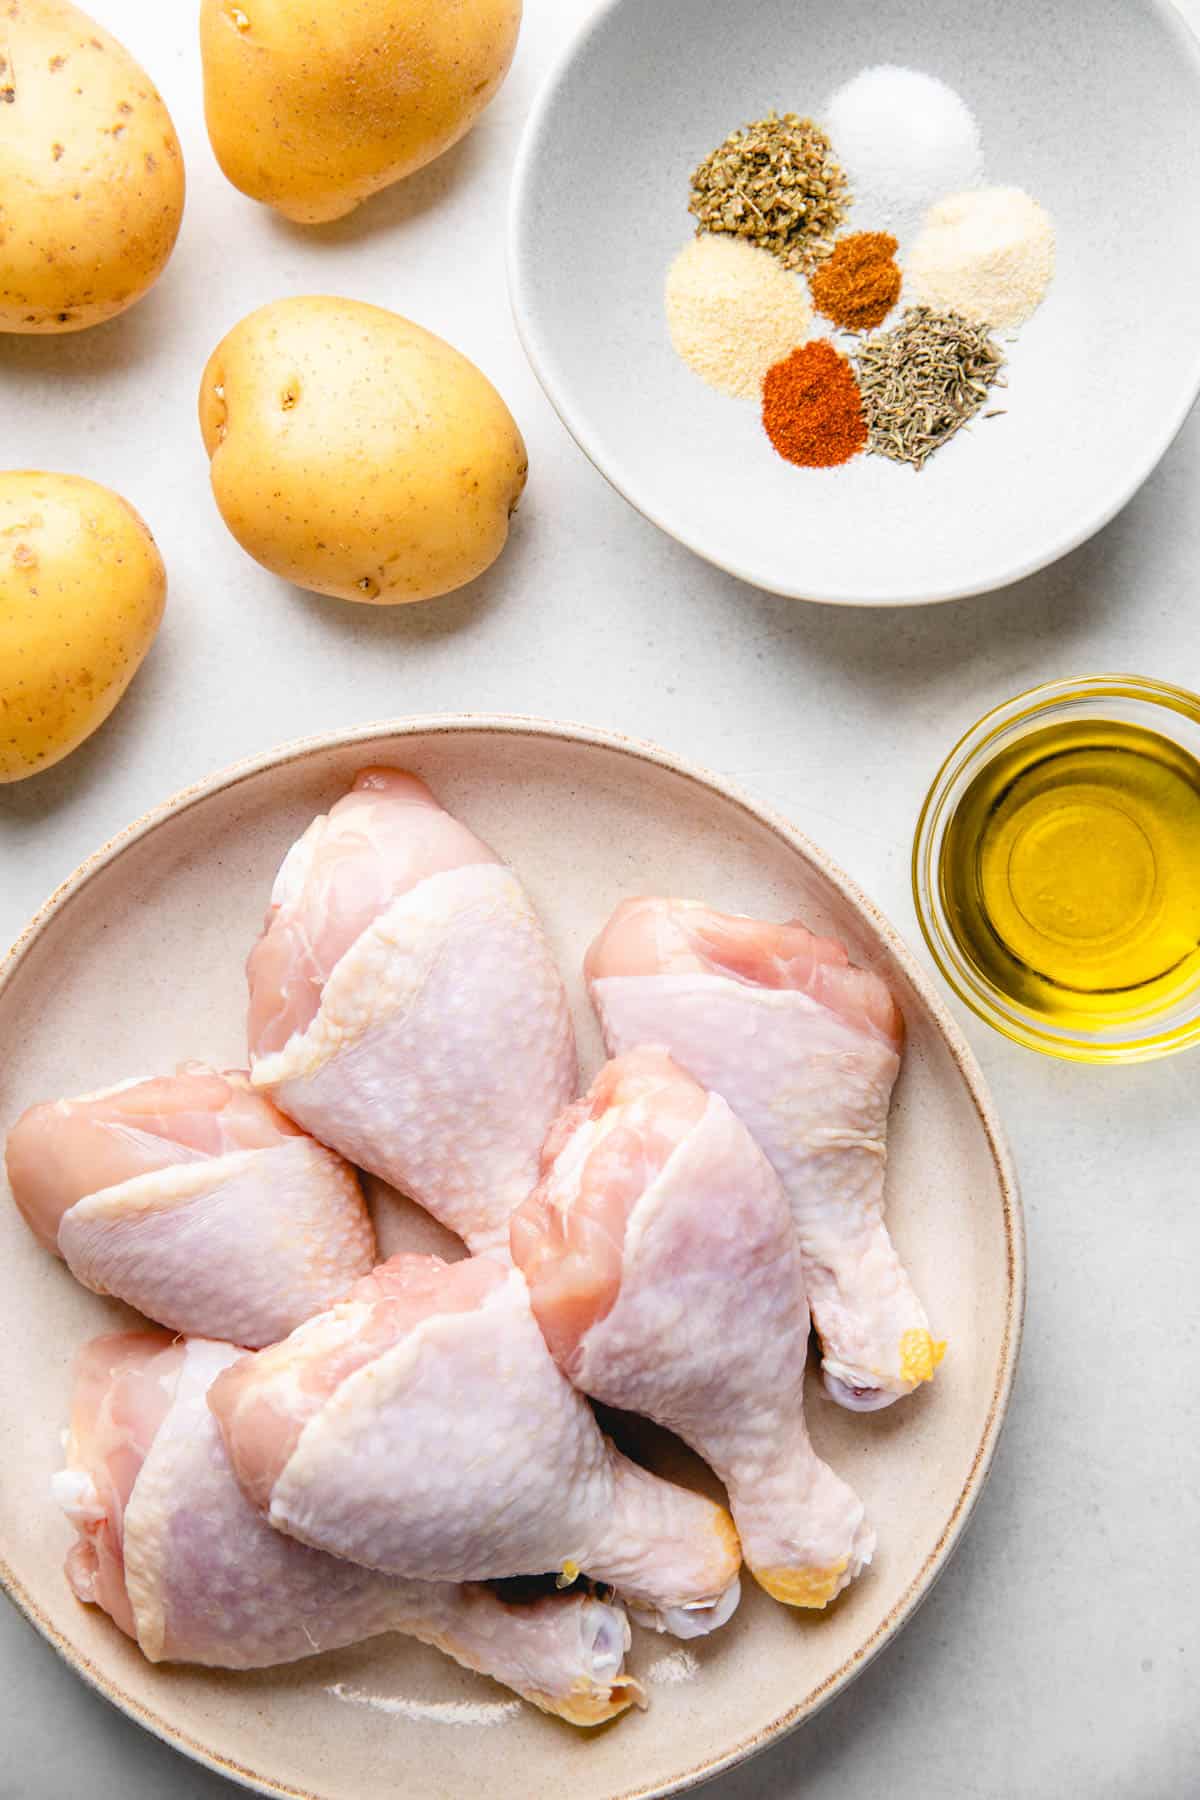 Ingredients to make oven baked chicken legs with potatoes.